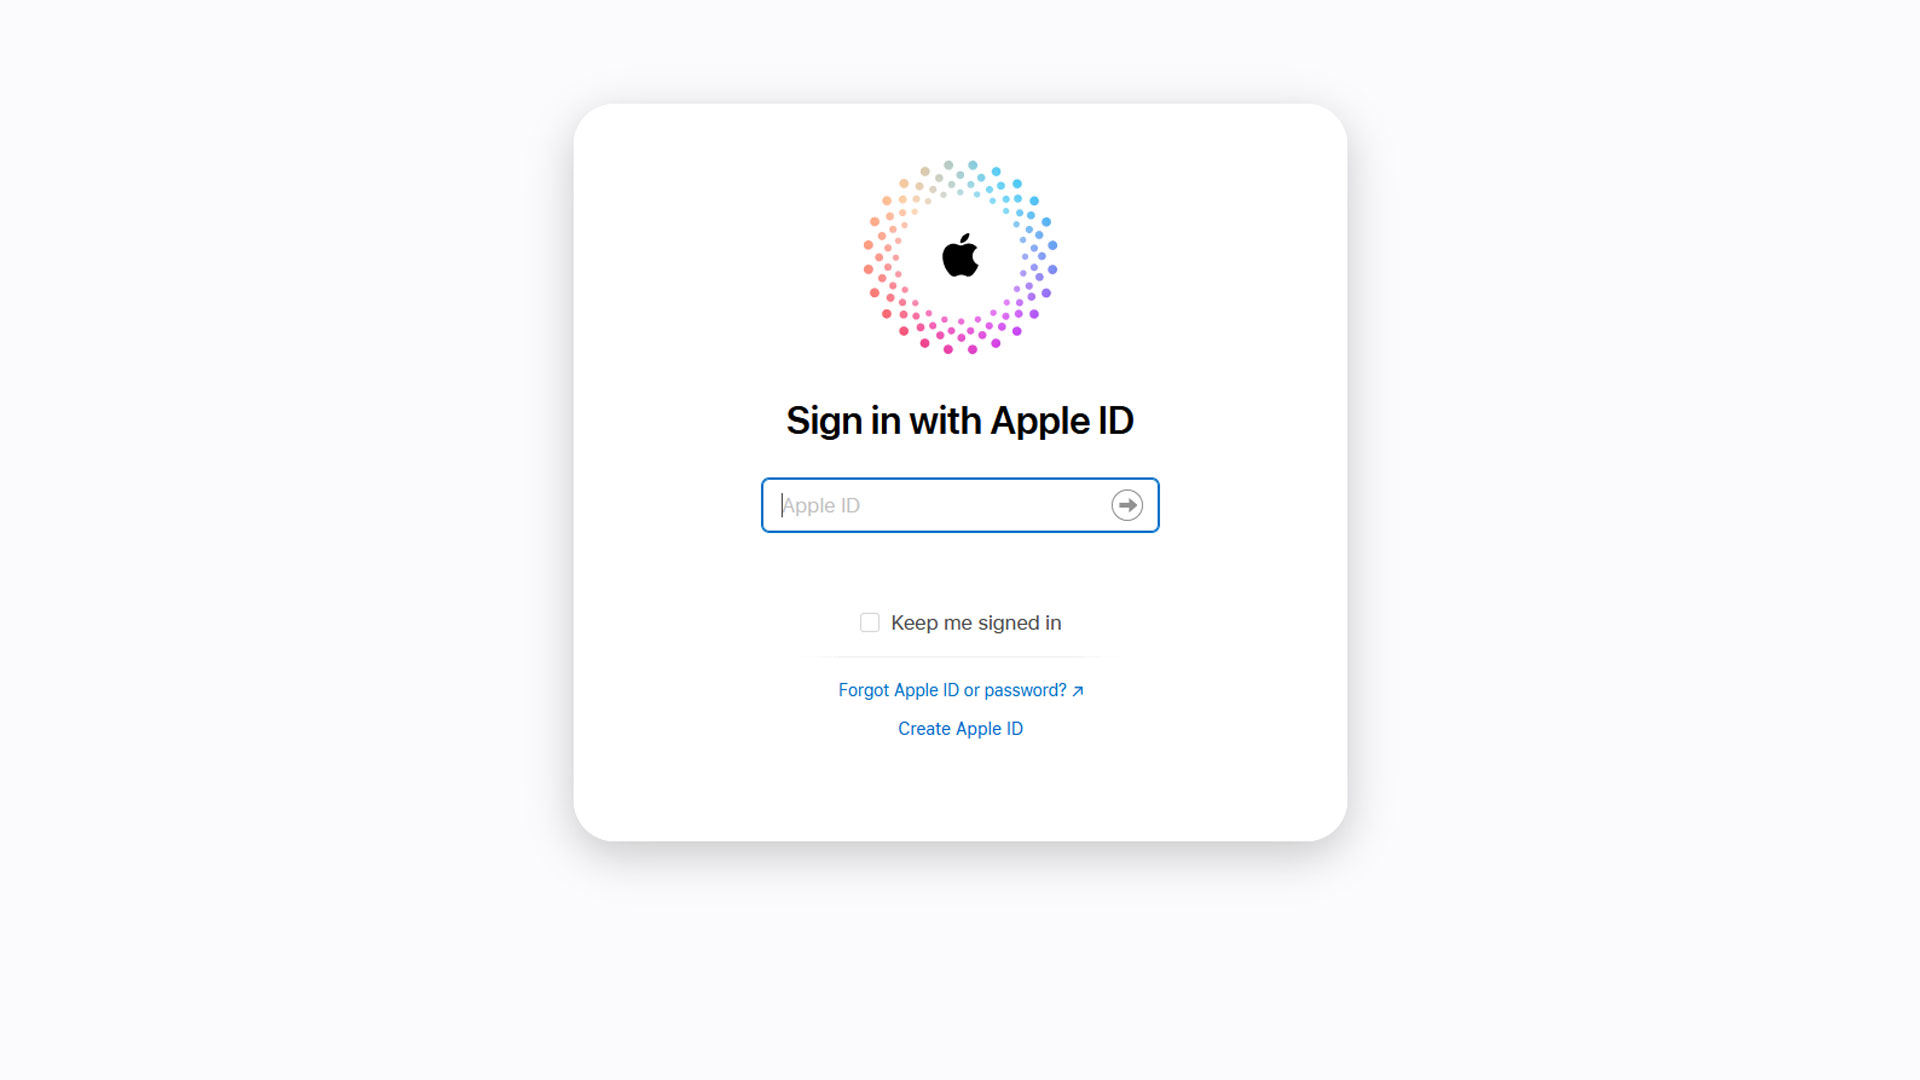 sign in with apple id instructions